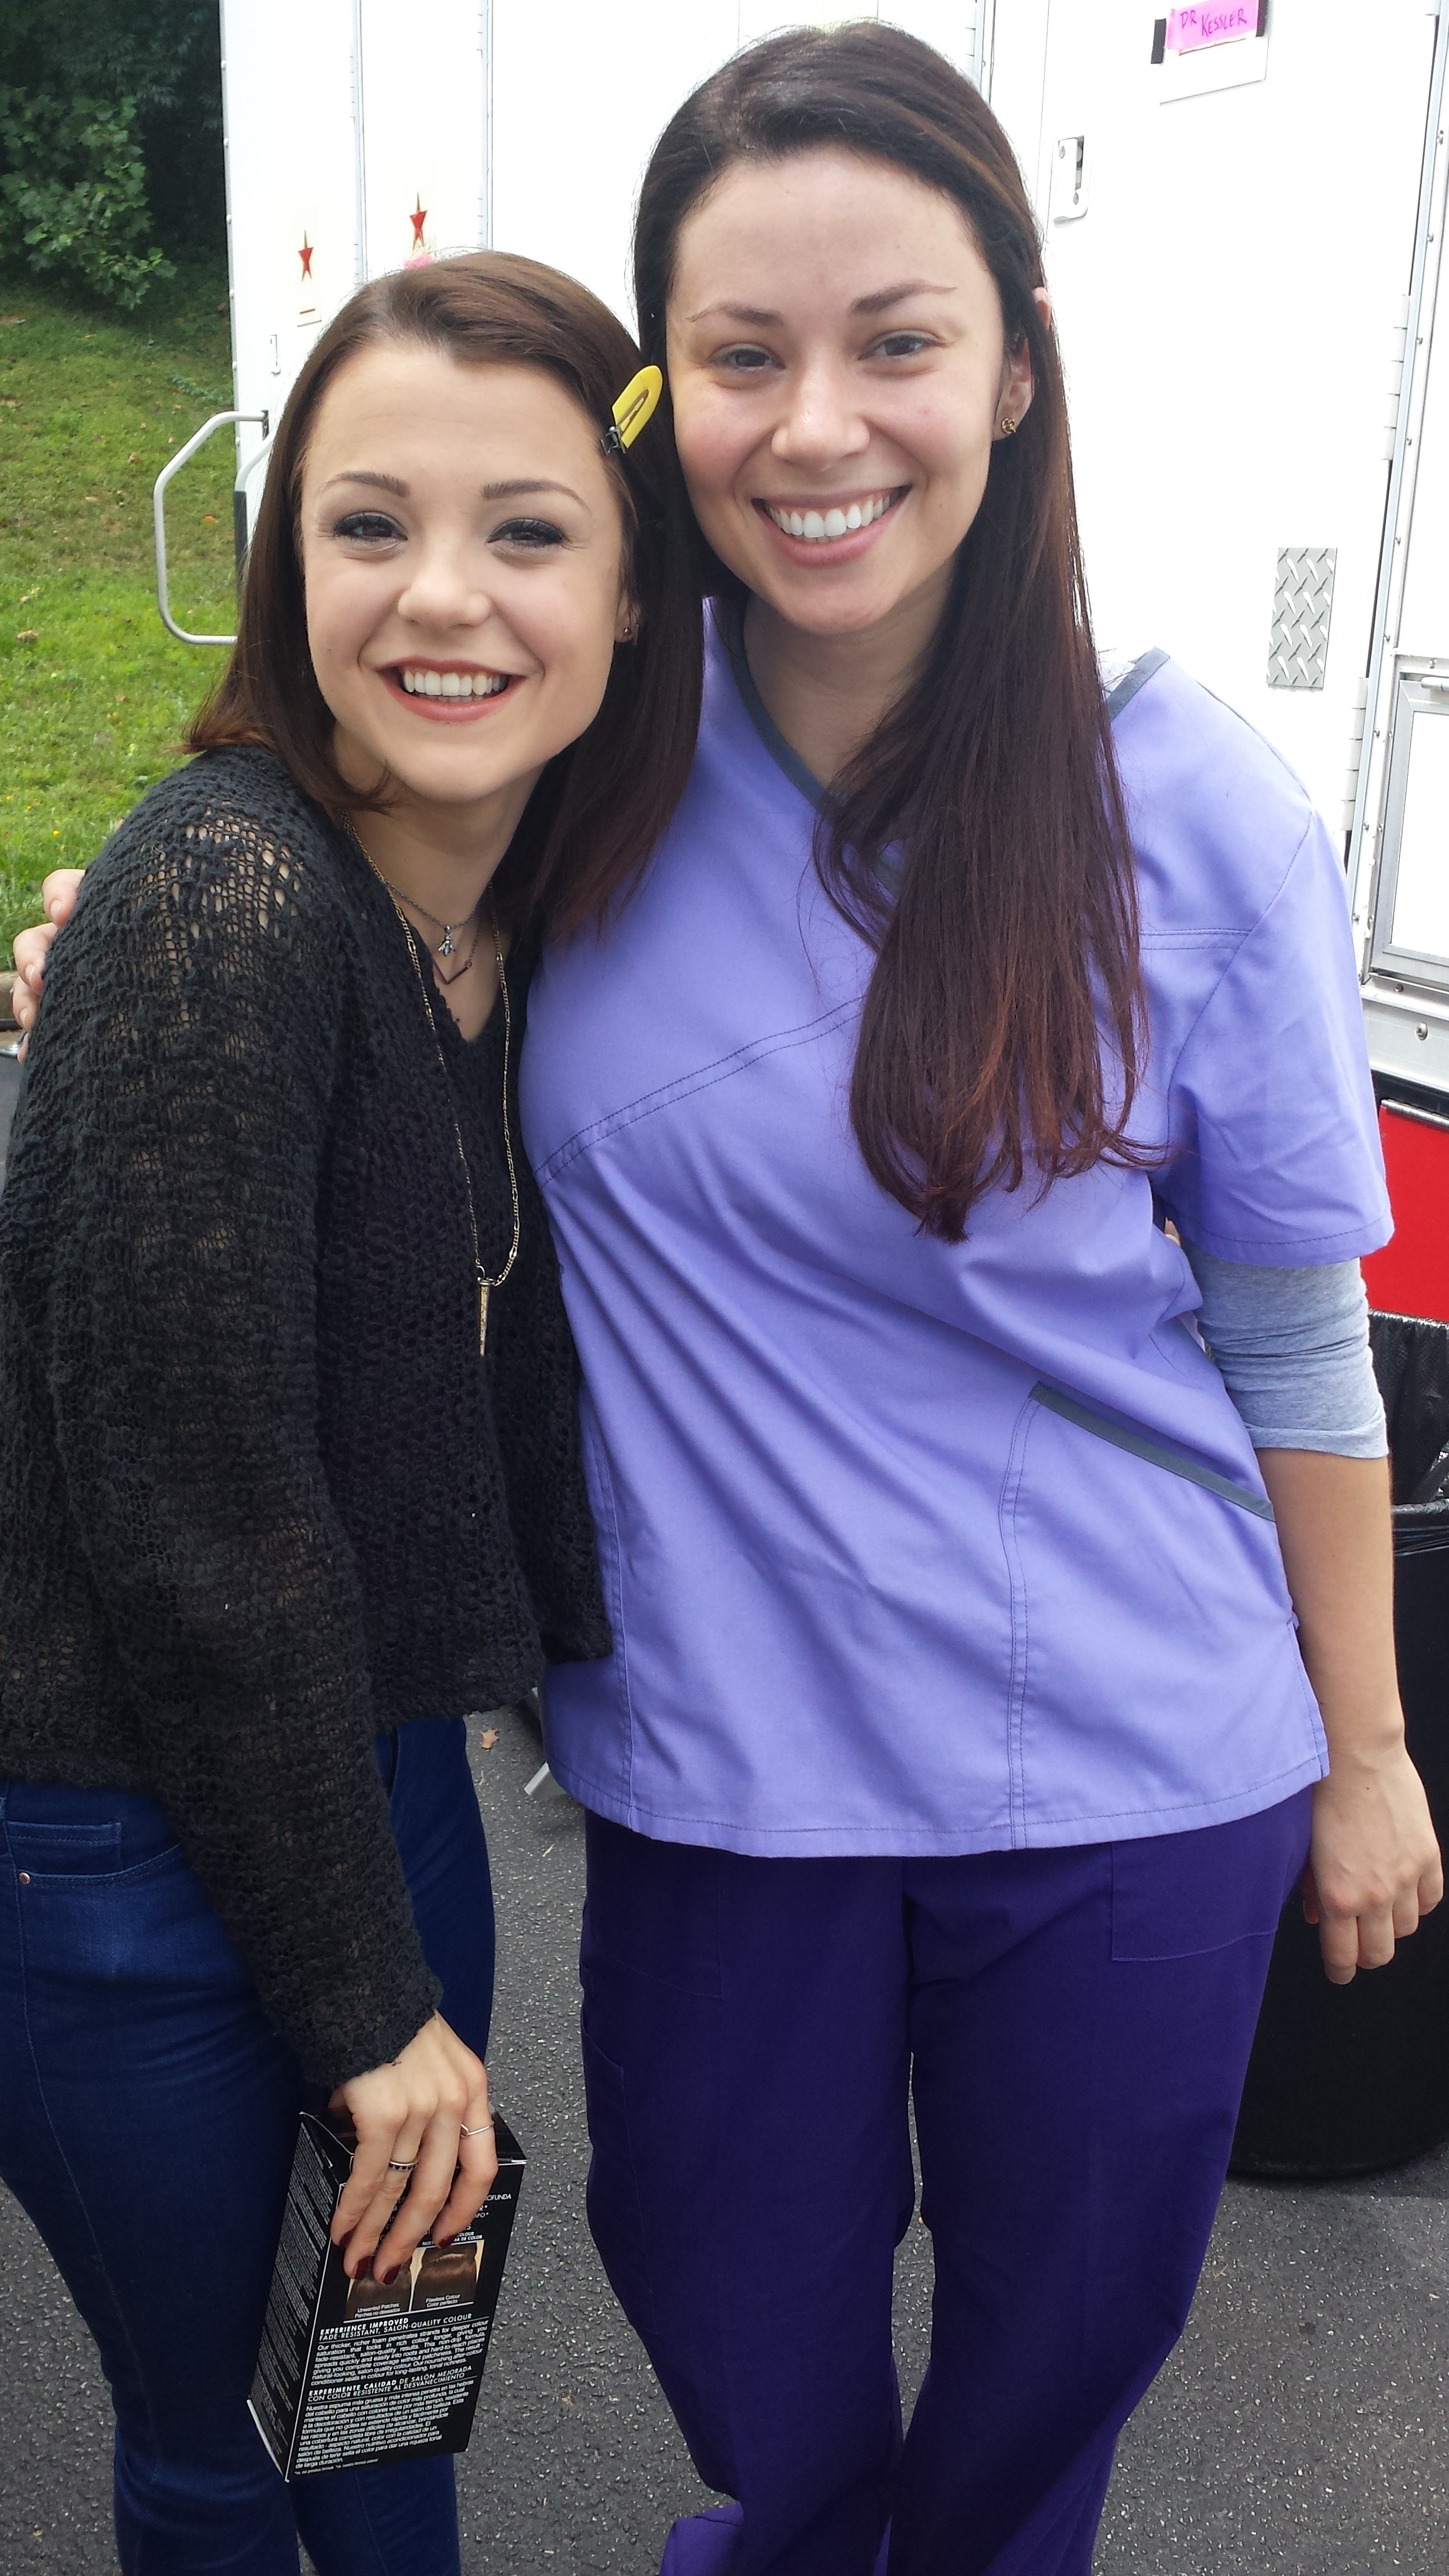 On set (Finding Carter) with Kathryn Prescott